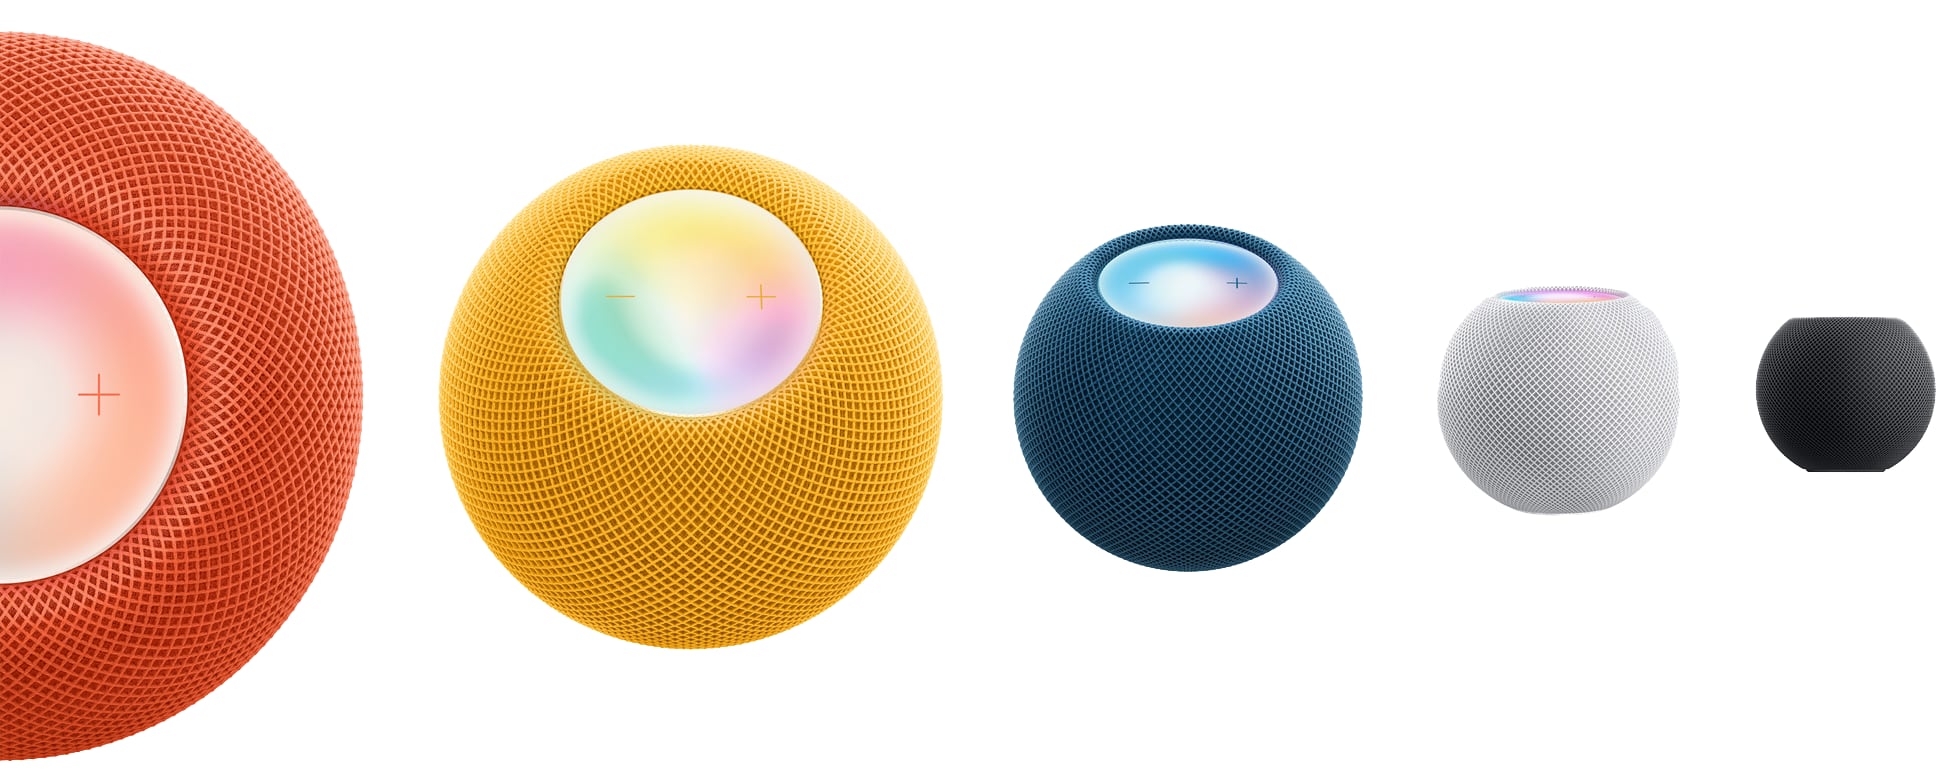 Apple's marketing image showing HomePod mini smart speakers in orange, yellow, blue, silver and black